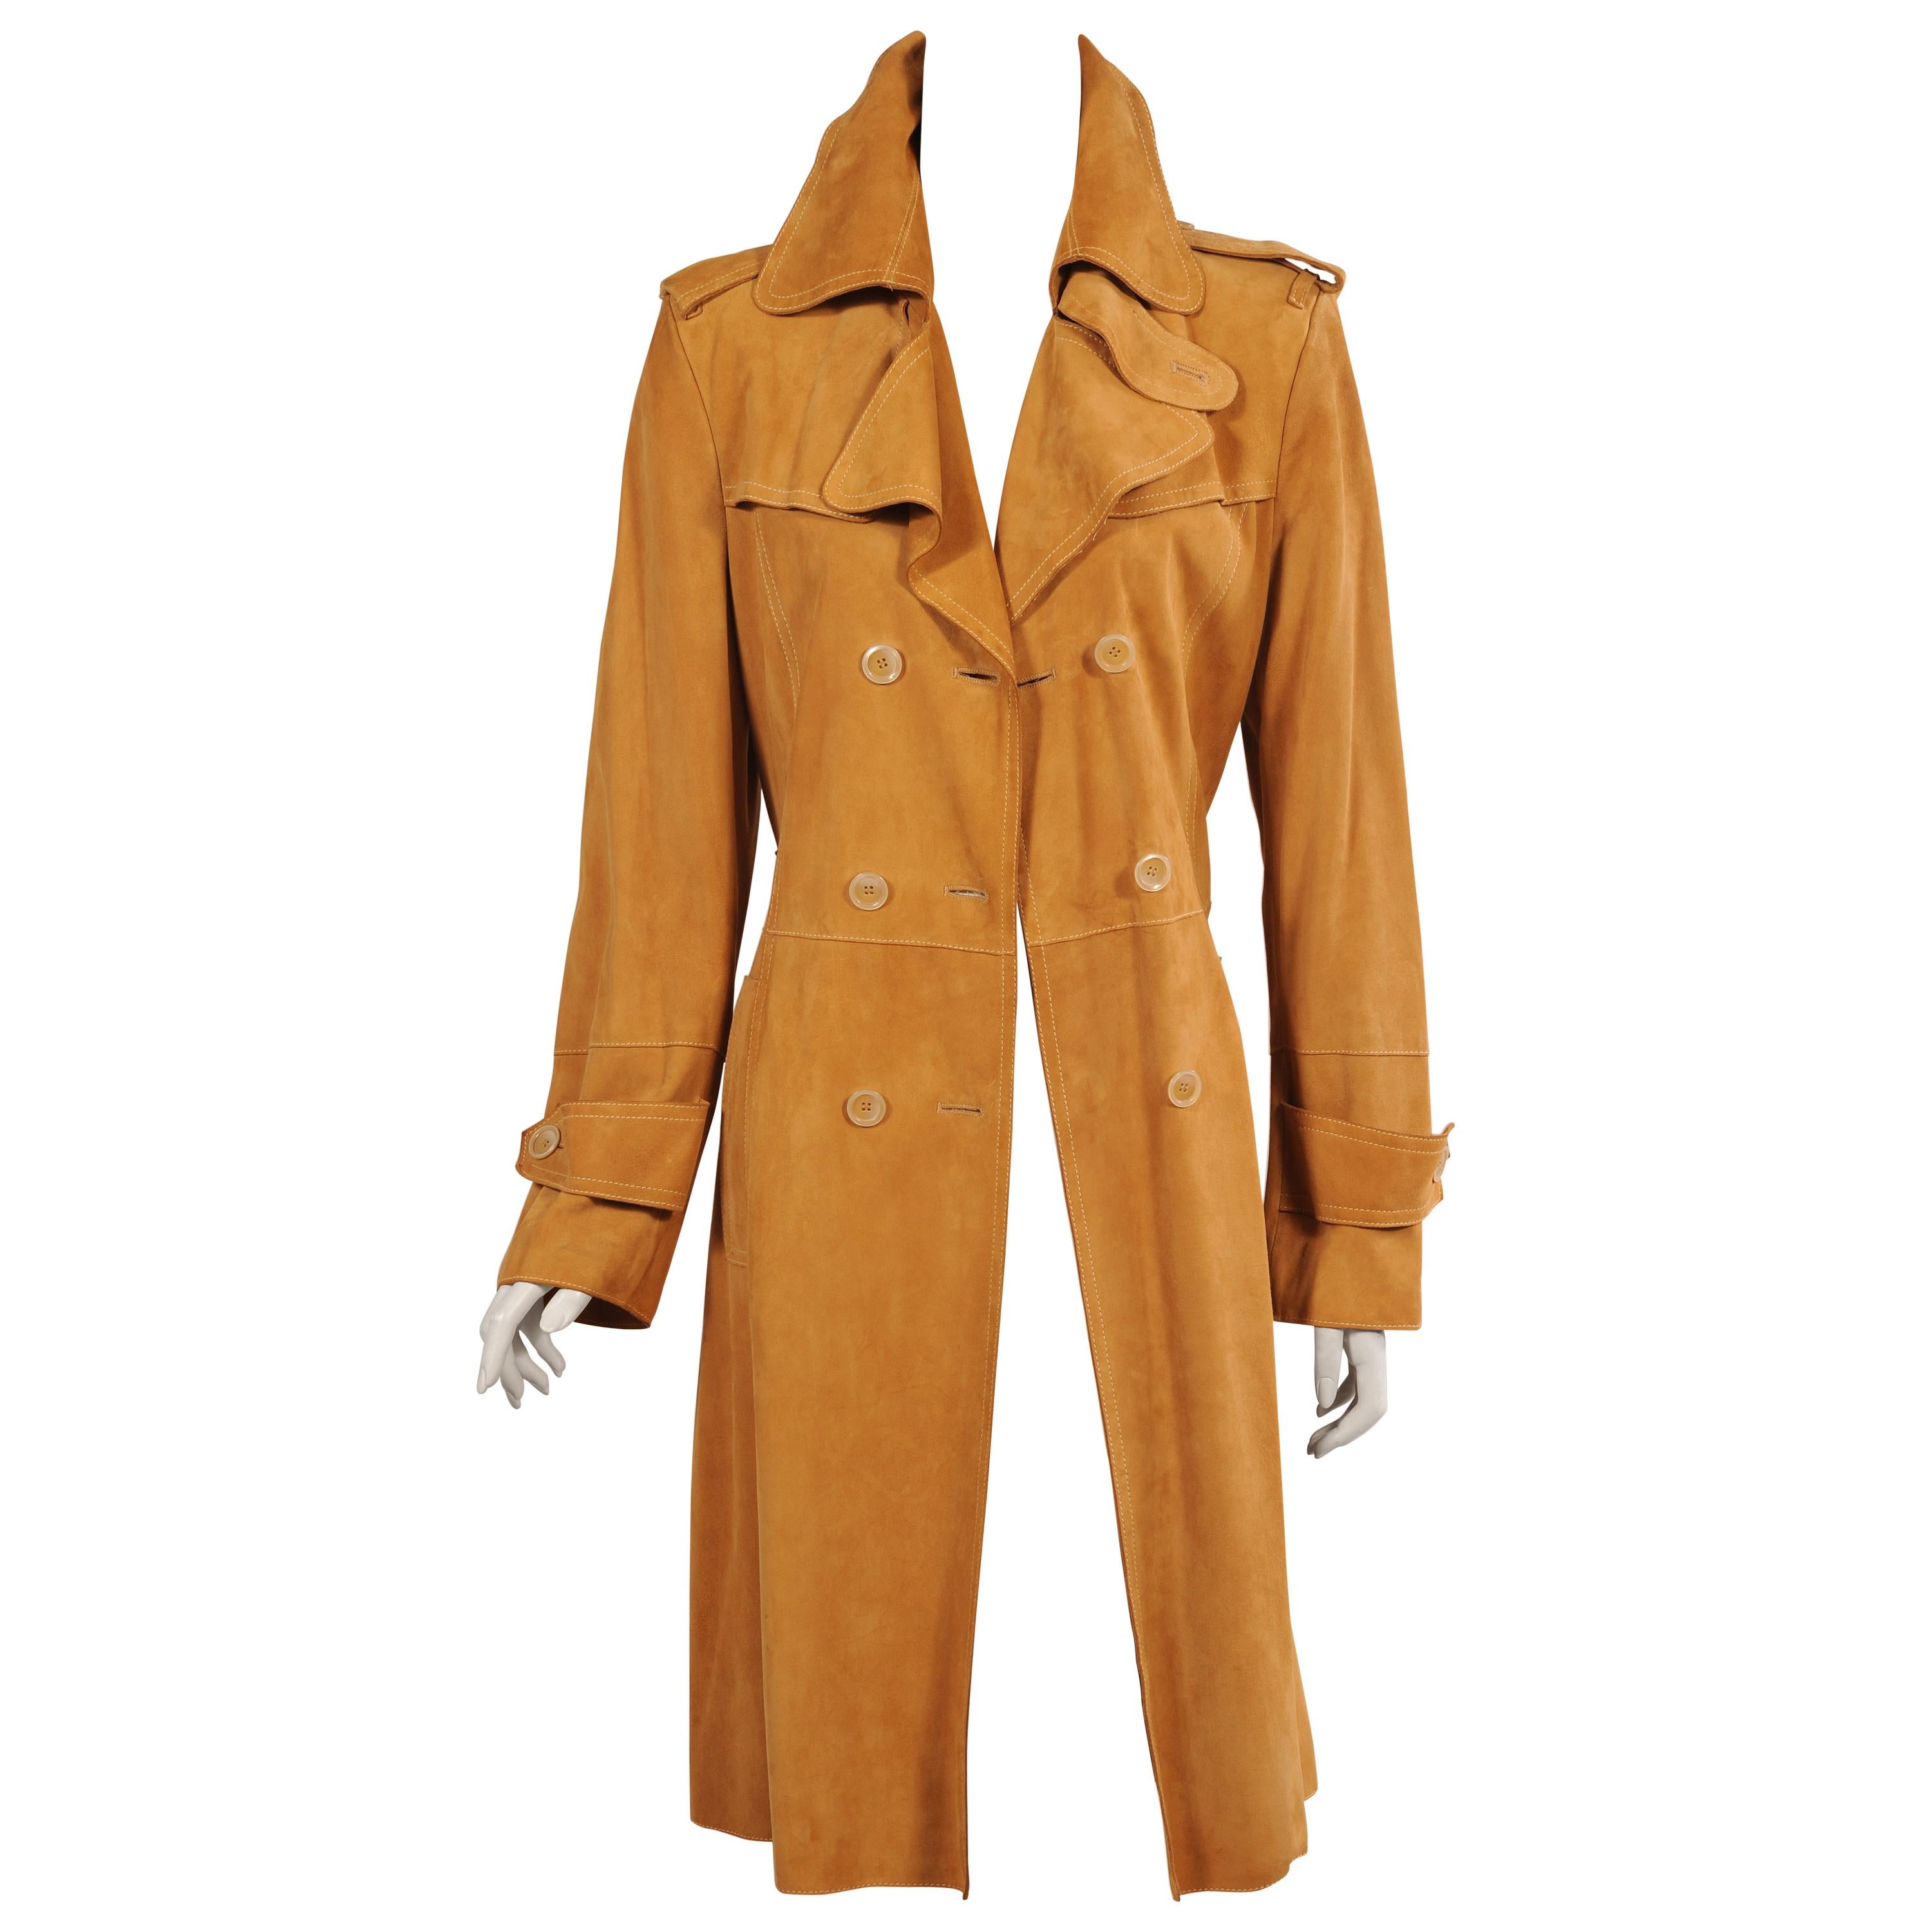 Walter Germany Caramel Colored Butter Soft Suede Trench Coat 